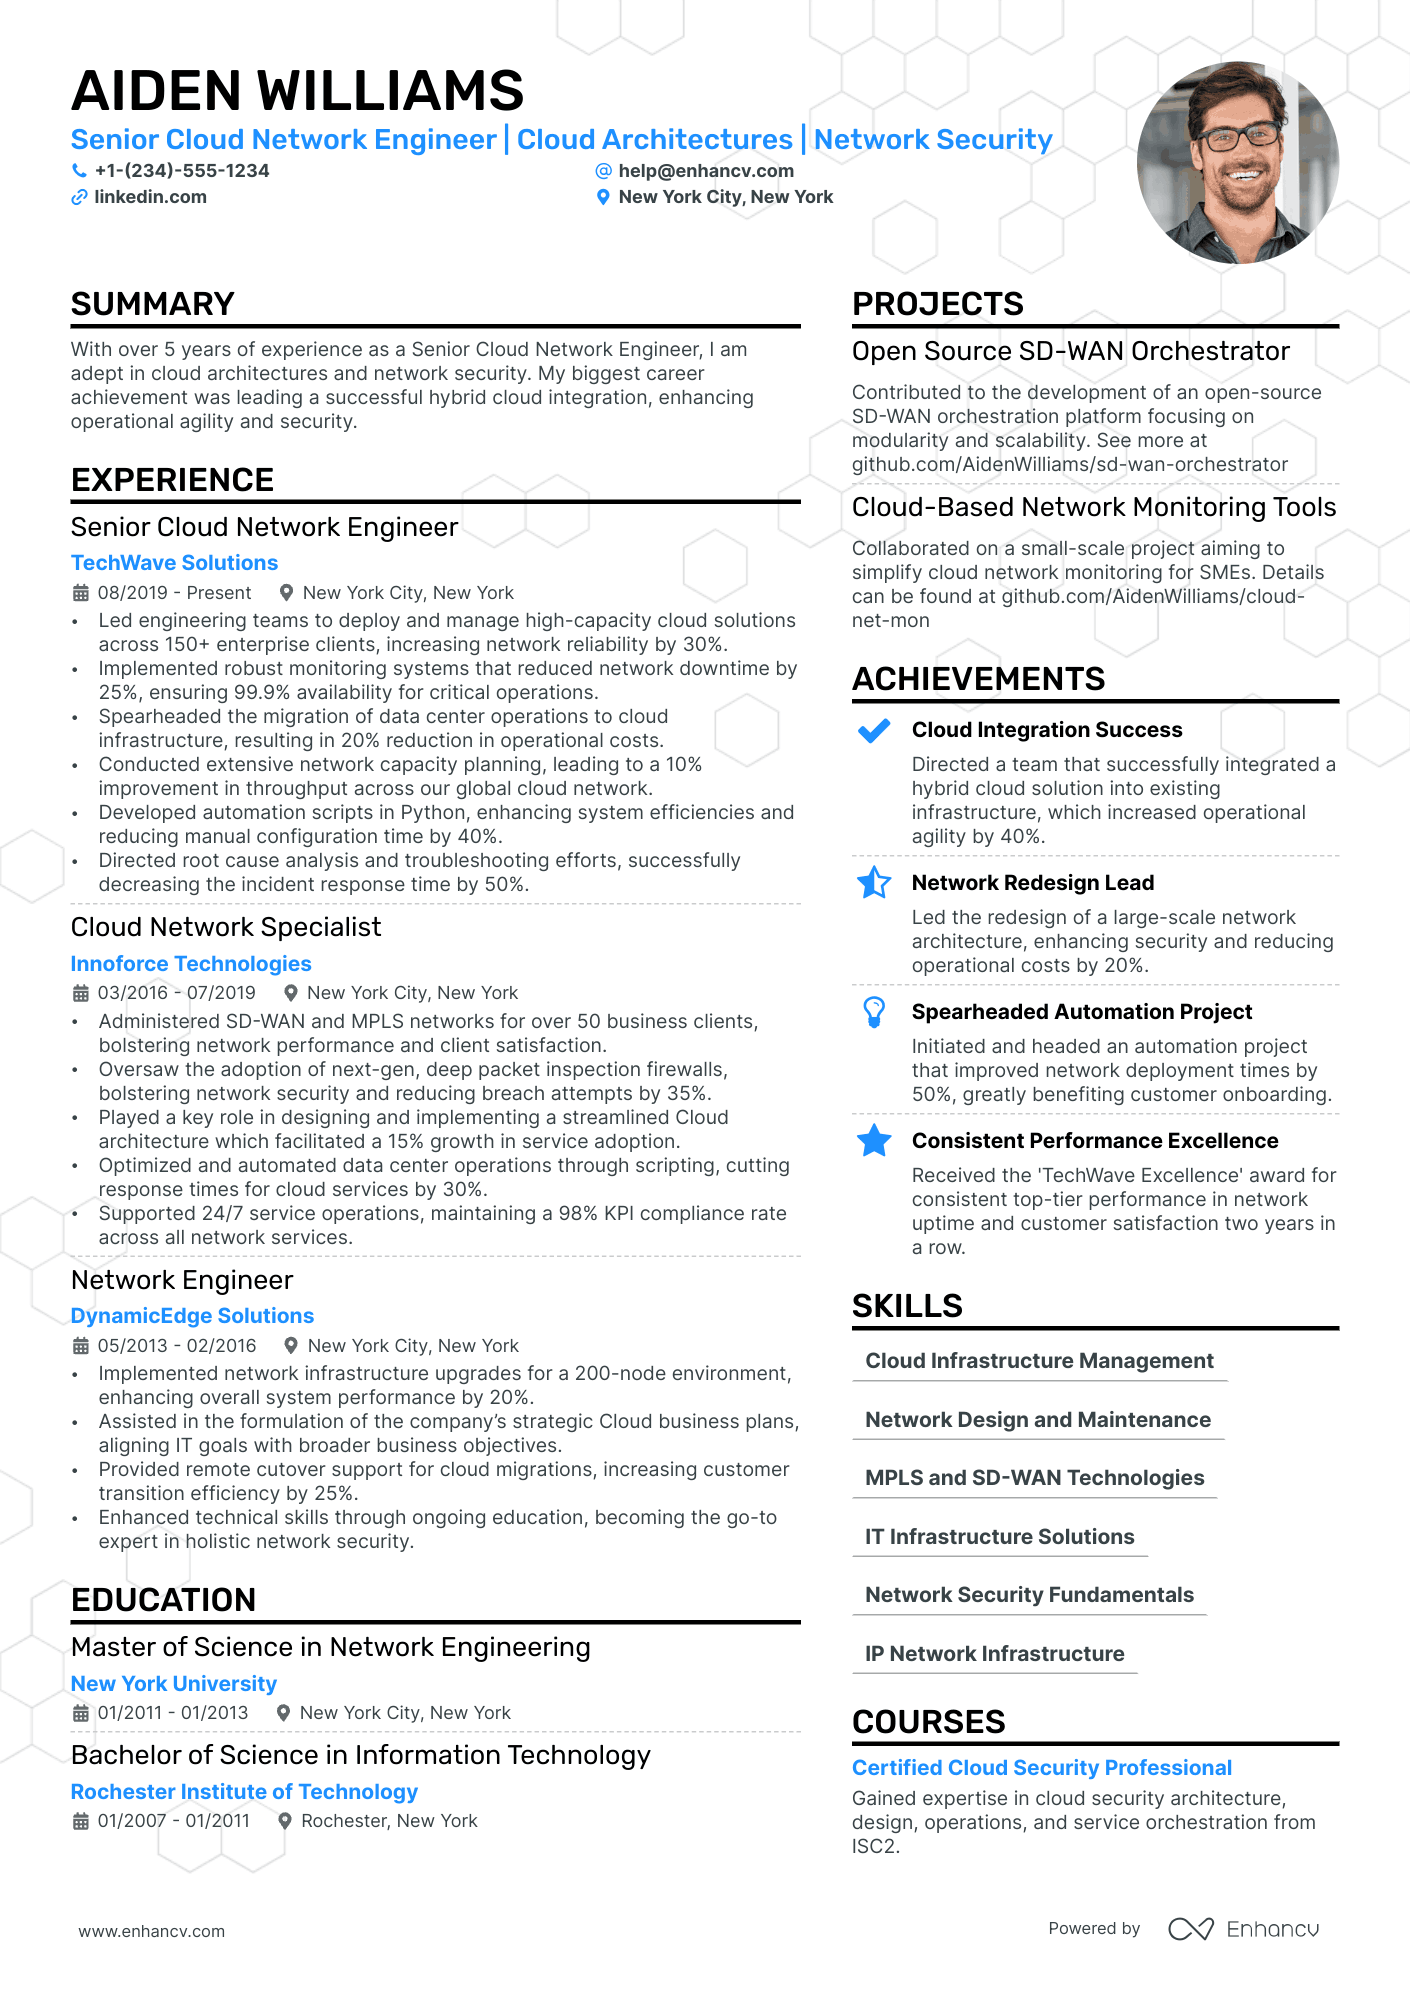 best resume format for network security engineer